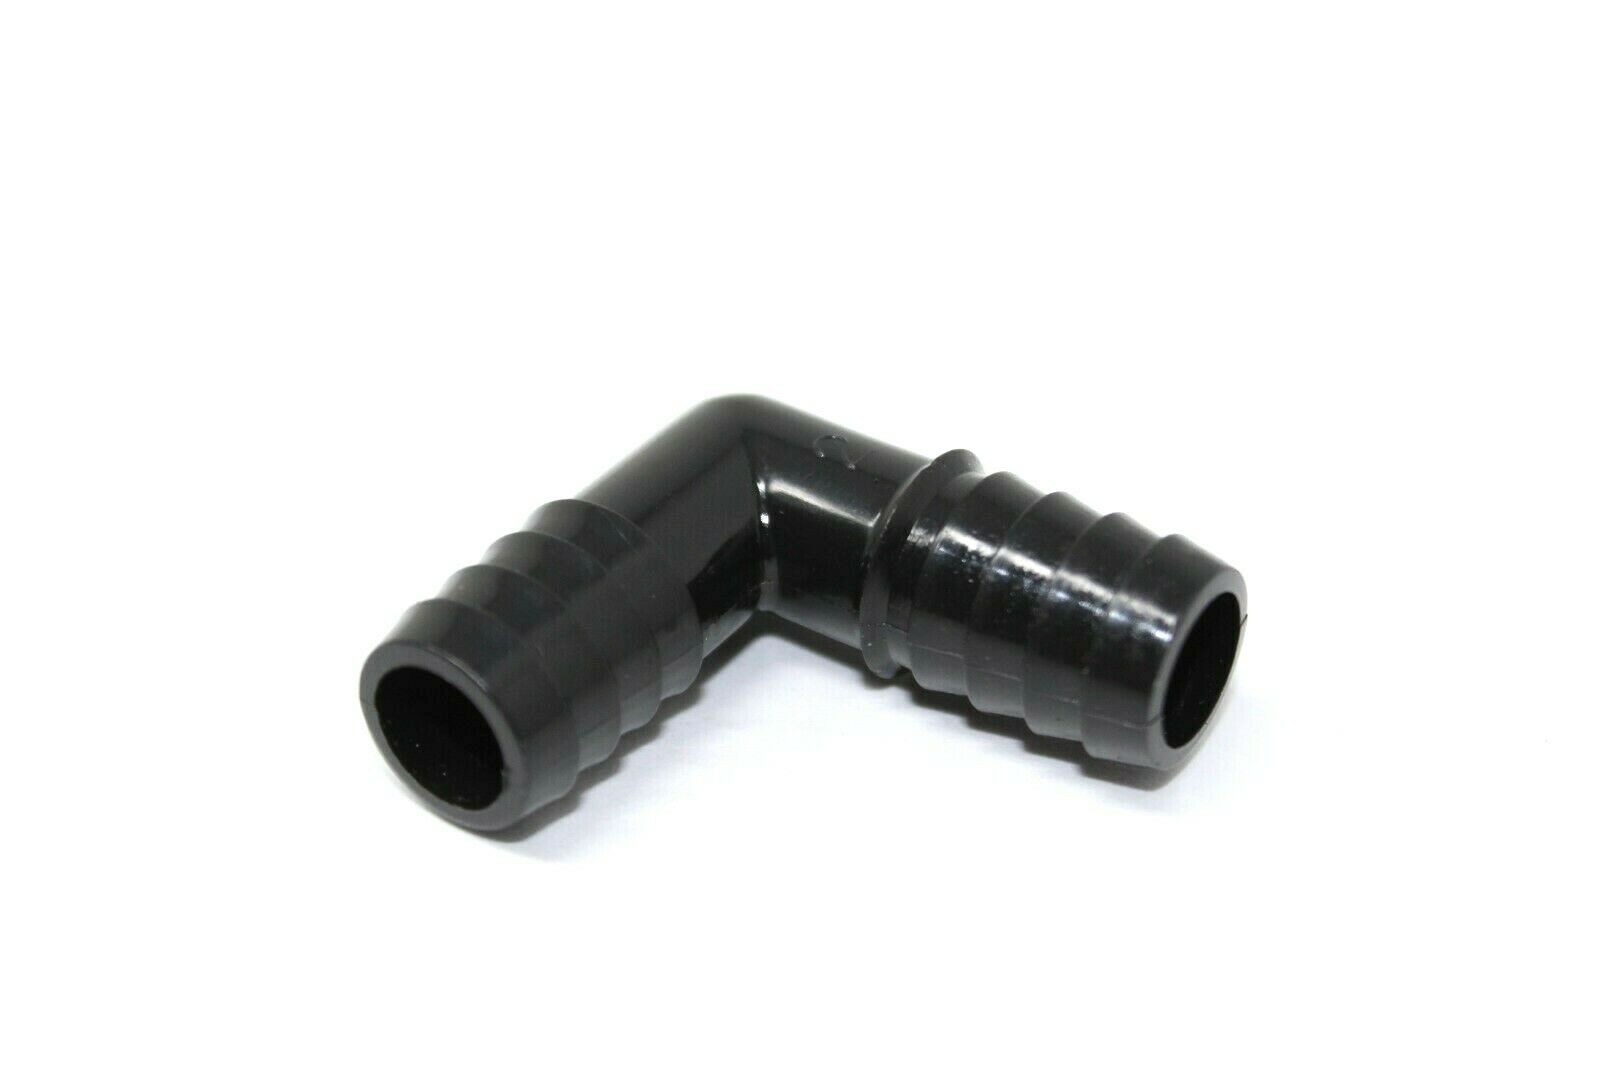 Condensate Fitting Drain Elbow 72R9040 Hose